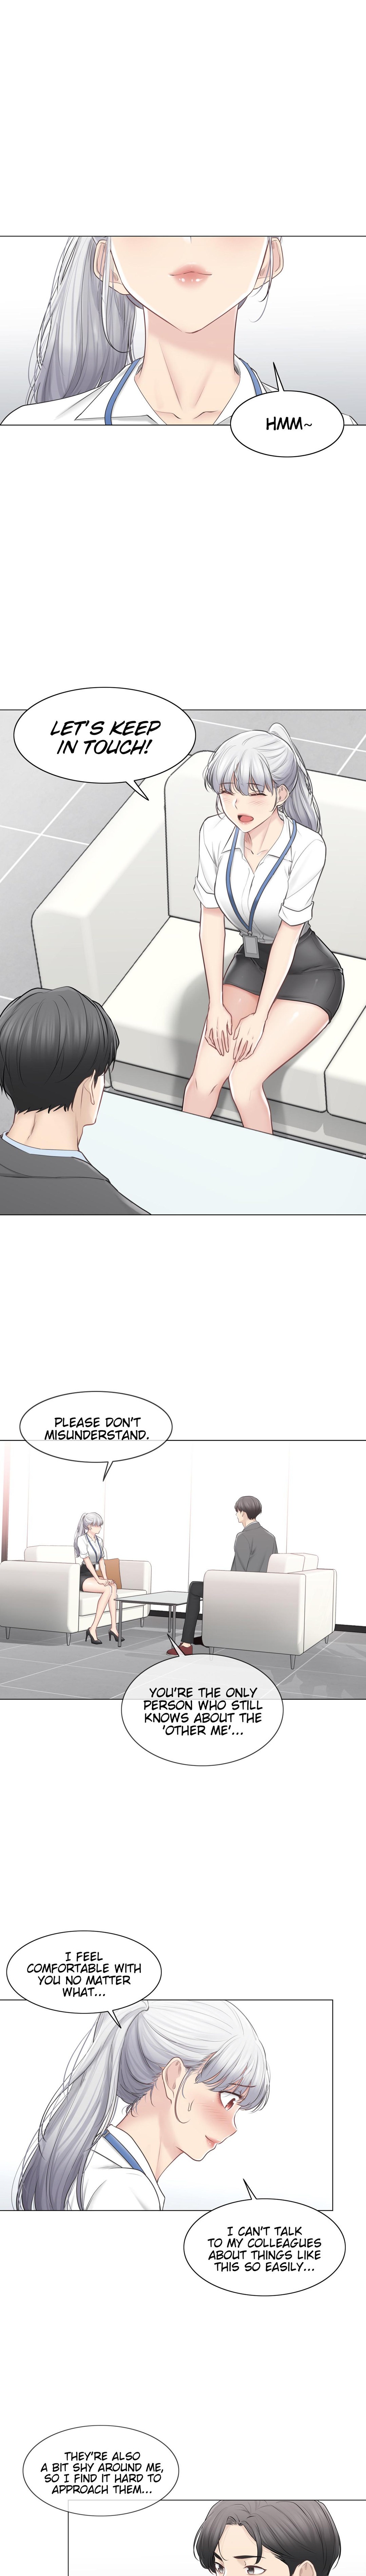 Touch to Unlock - Chapter 108.1 Page 5